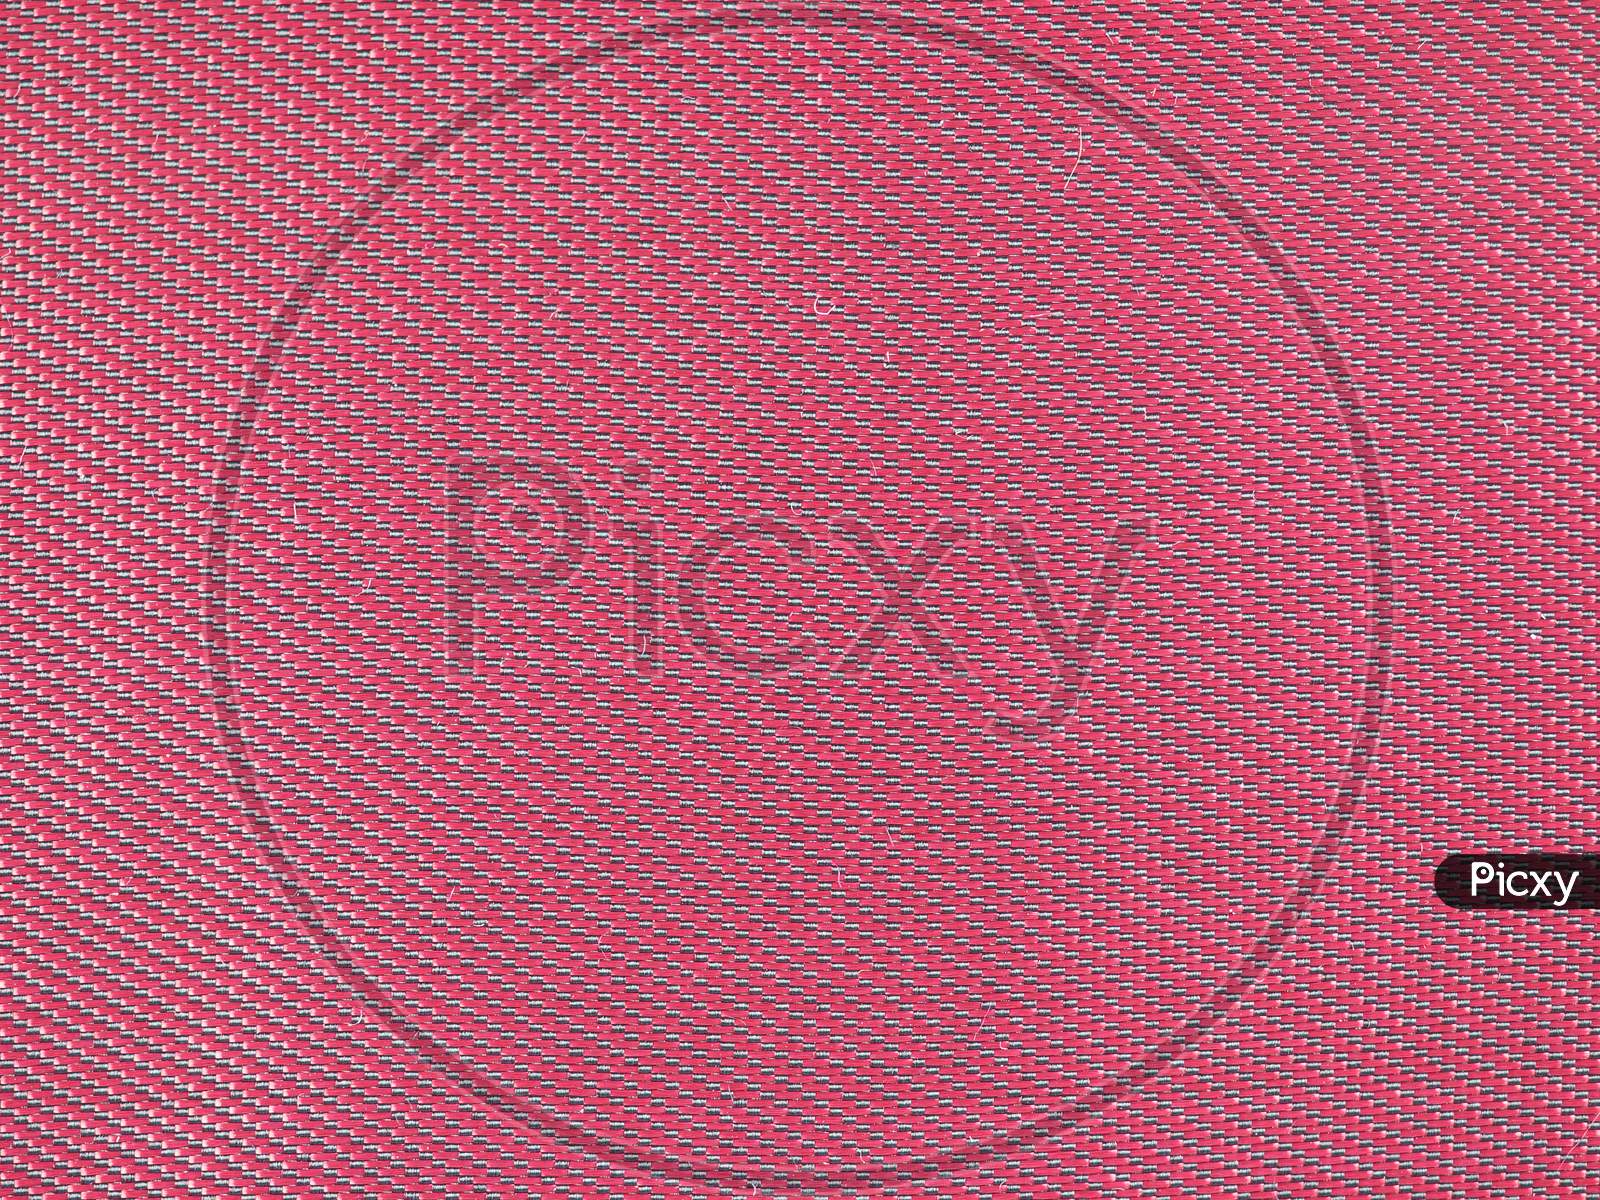 Pink Fabric Background